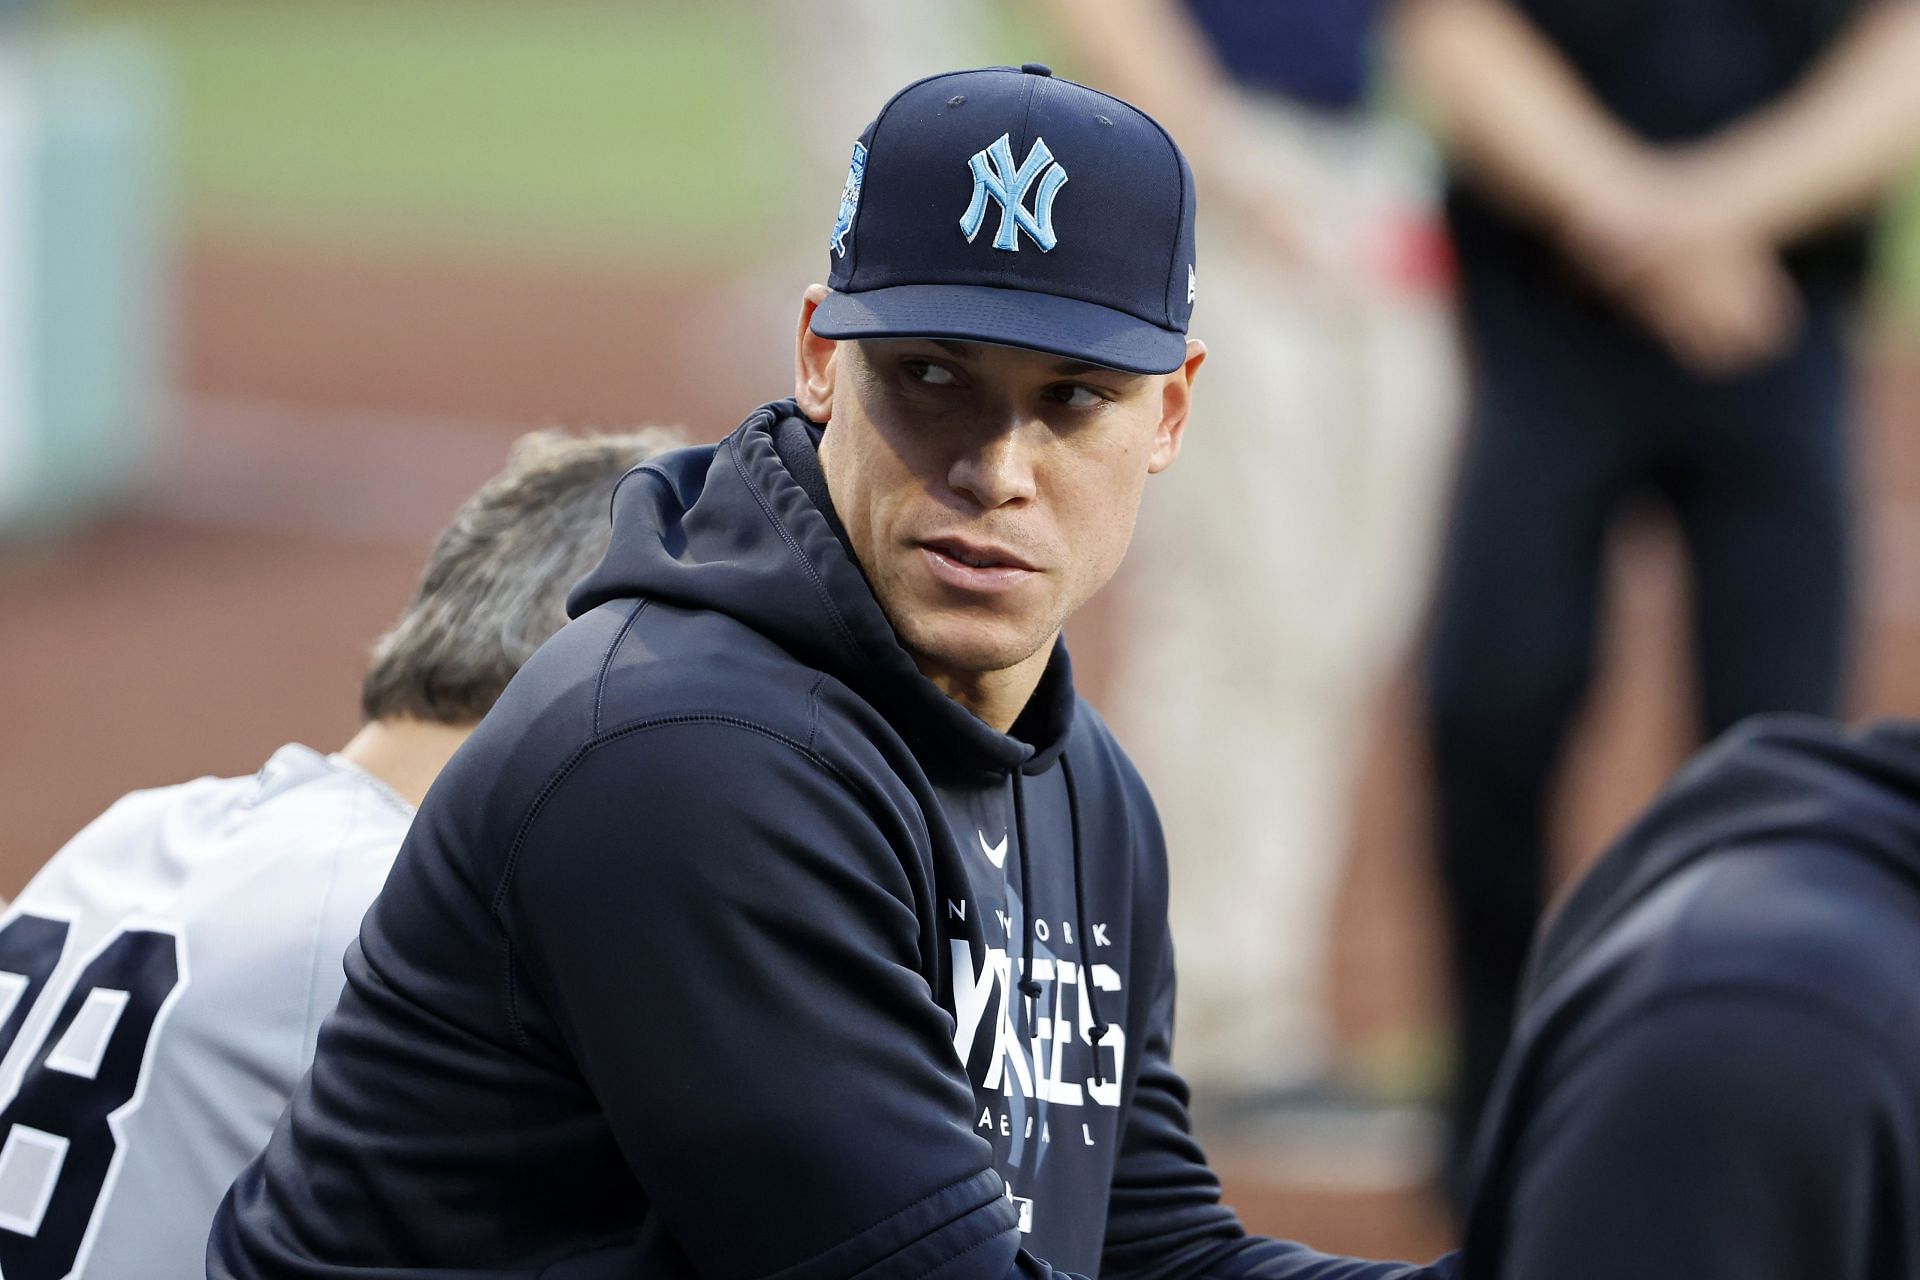 Aaron Judge of the New York Yankees looks on from the dugout against the Boston Red Sox at Fenway Park